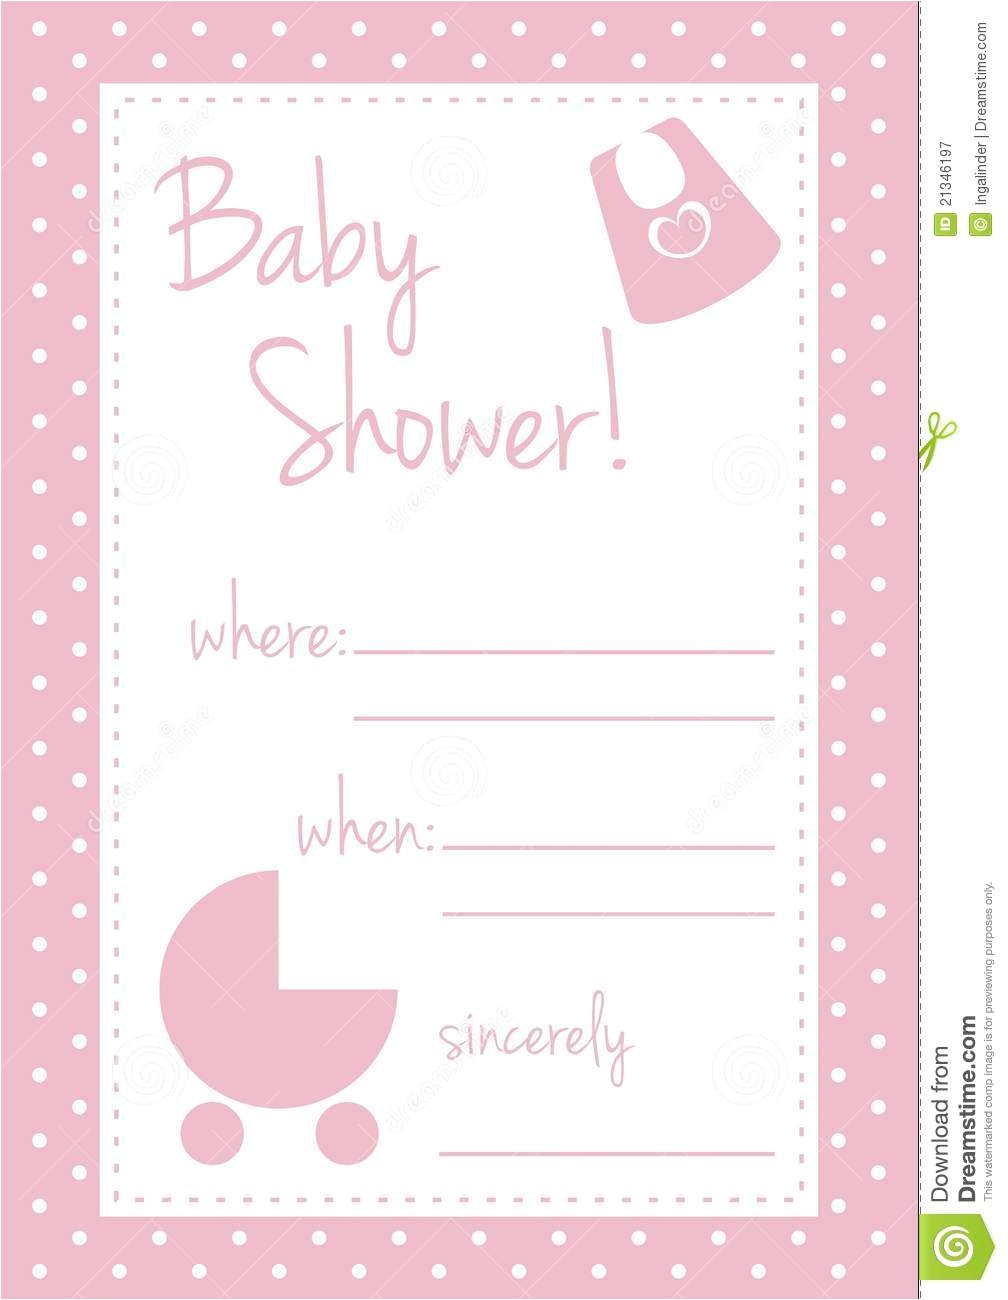 invitation baby shower email